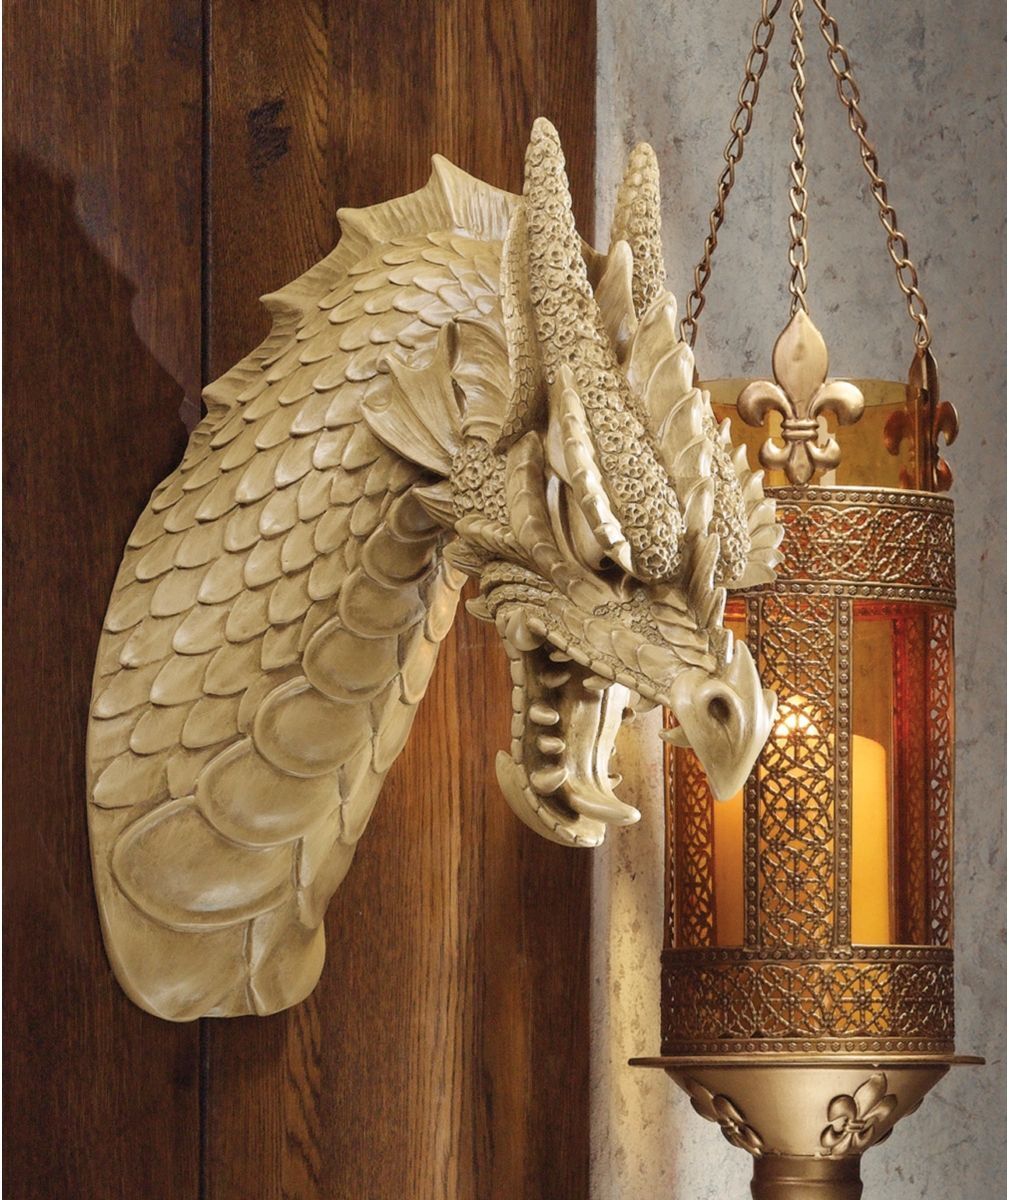 Medieval Beast Gothic Knight's Trophy Wall Mounted Horned Dragon Sculpture